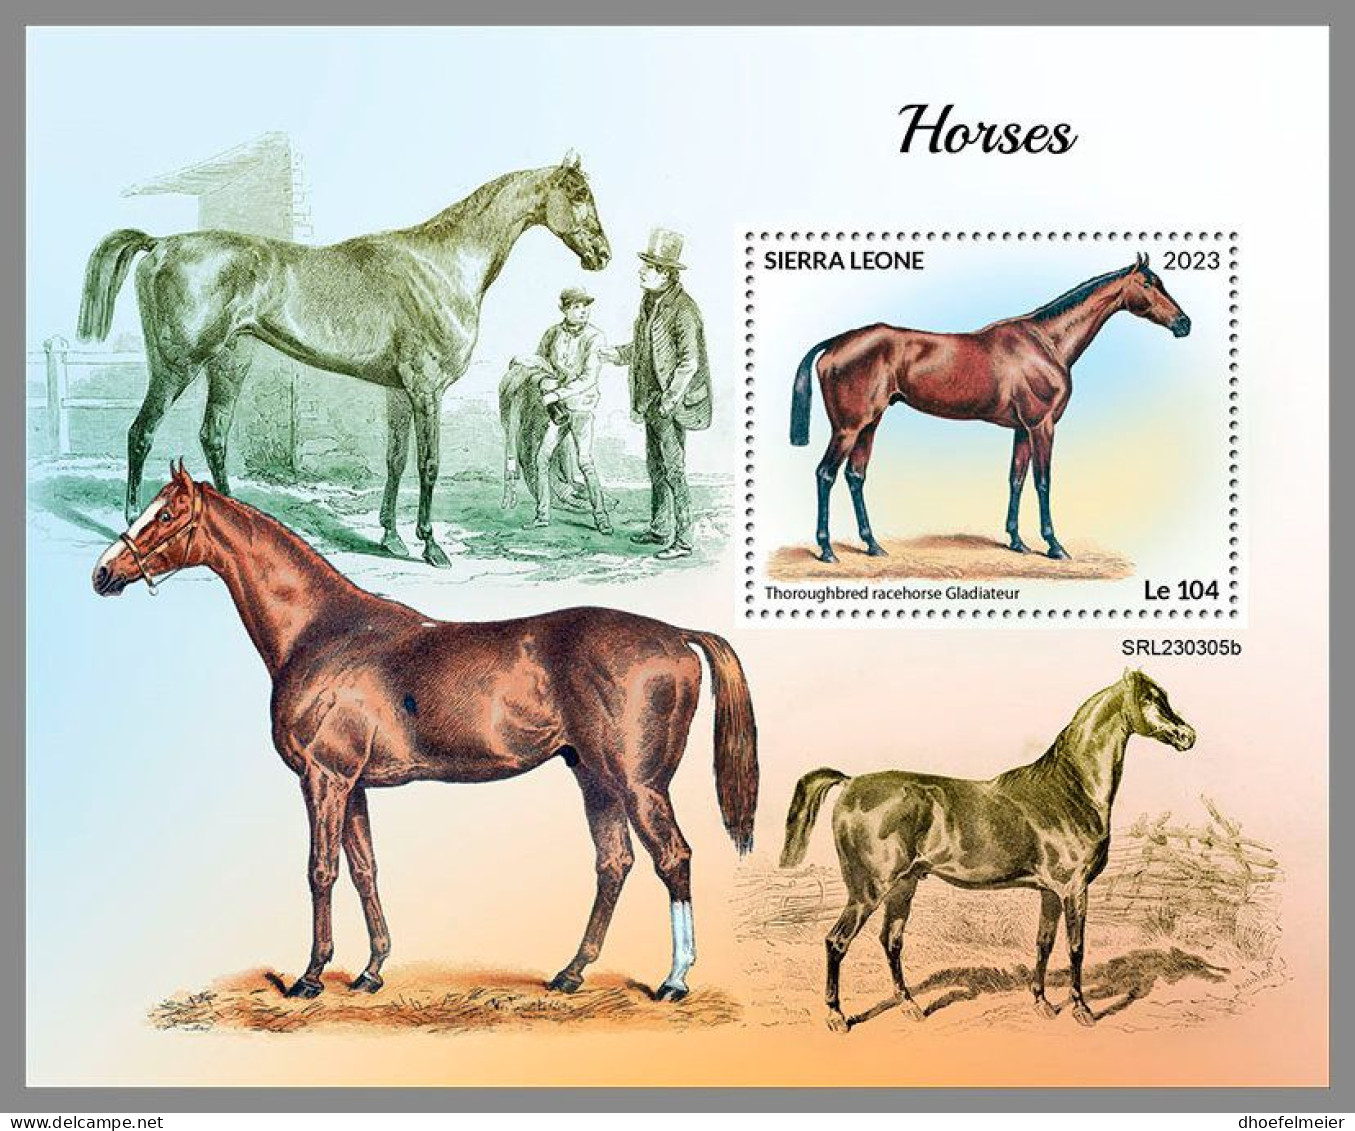 SIERRA LEONE 2023 MNH Horses Pferde S/S – OFFICIAL ISSUE – DHQ2418 - Paarden